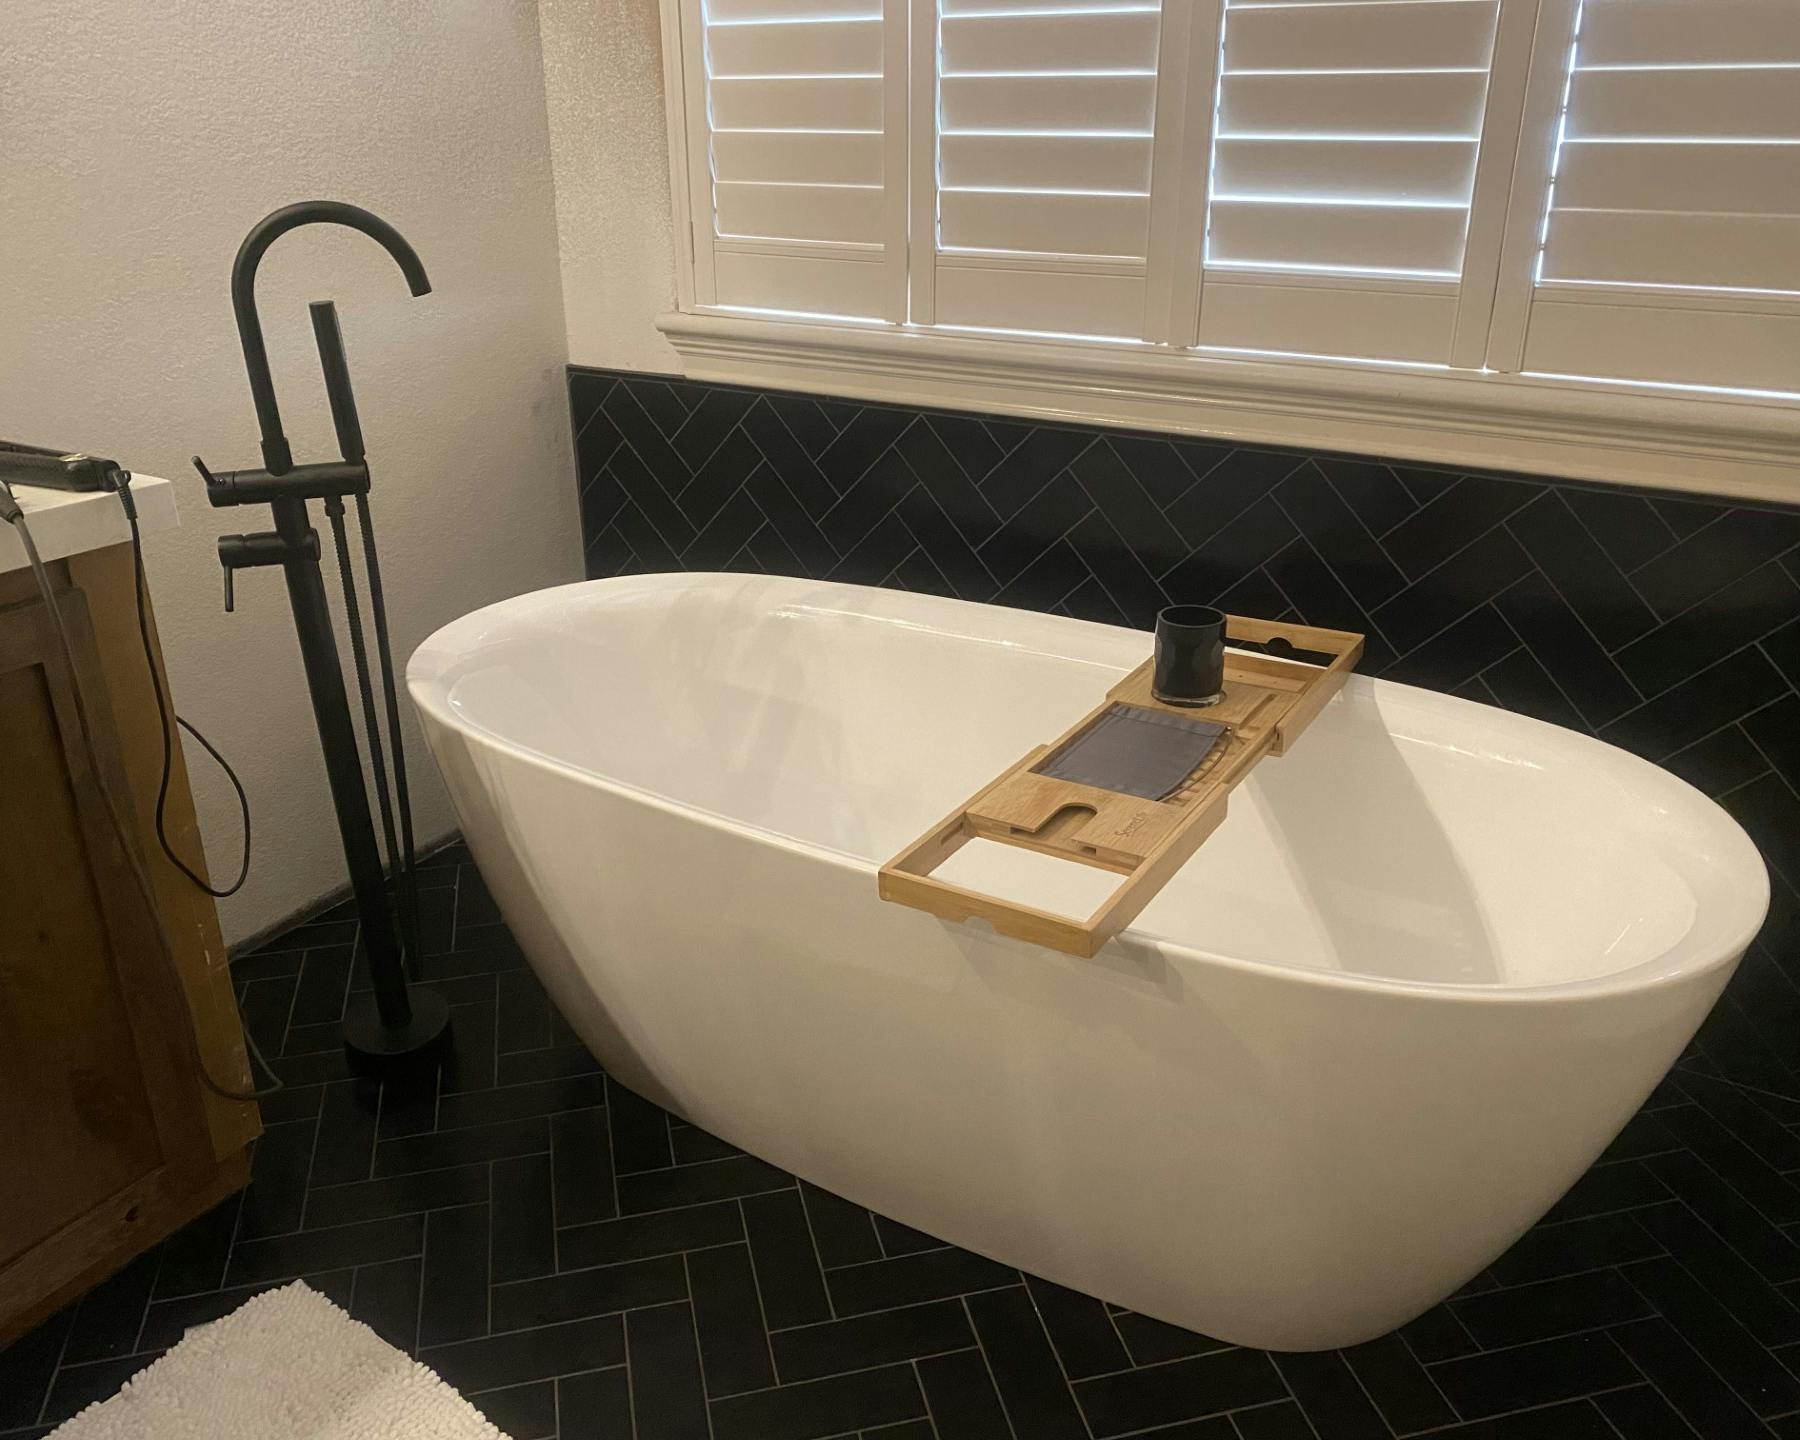 A modern bathroom featuring a sleek white freestanding bathtub against a wall with white shutters. A wooden bath caddy rests atop the tub, holding a dark-colored mug. To the left of the tub stands a tall, dark-colored floor-mounted faucet. The room has black tiles with a herringbone pattern accent, and a fluffy white bath mat lies on the floor.